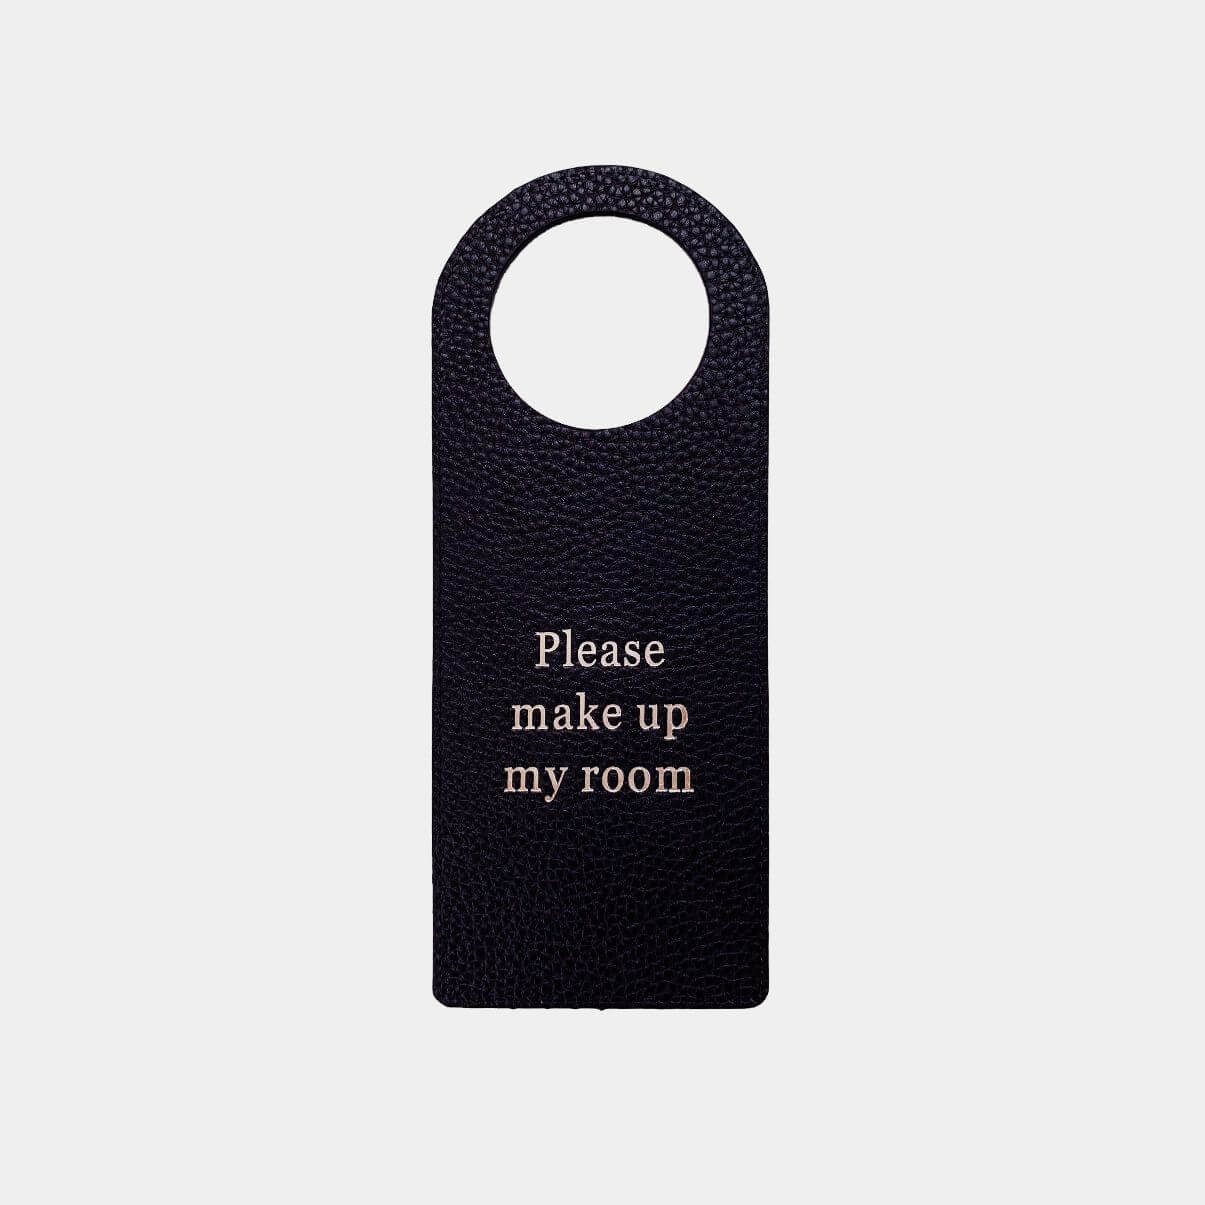 Luxury leather do not disturb sign for hotel doors